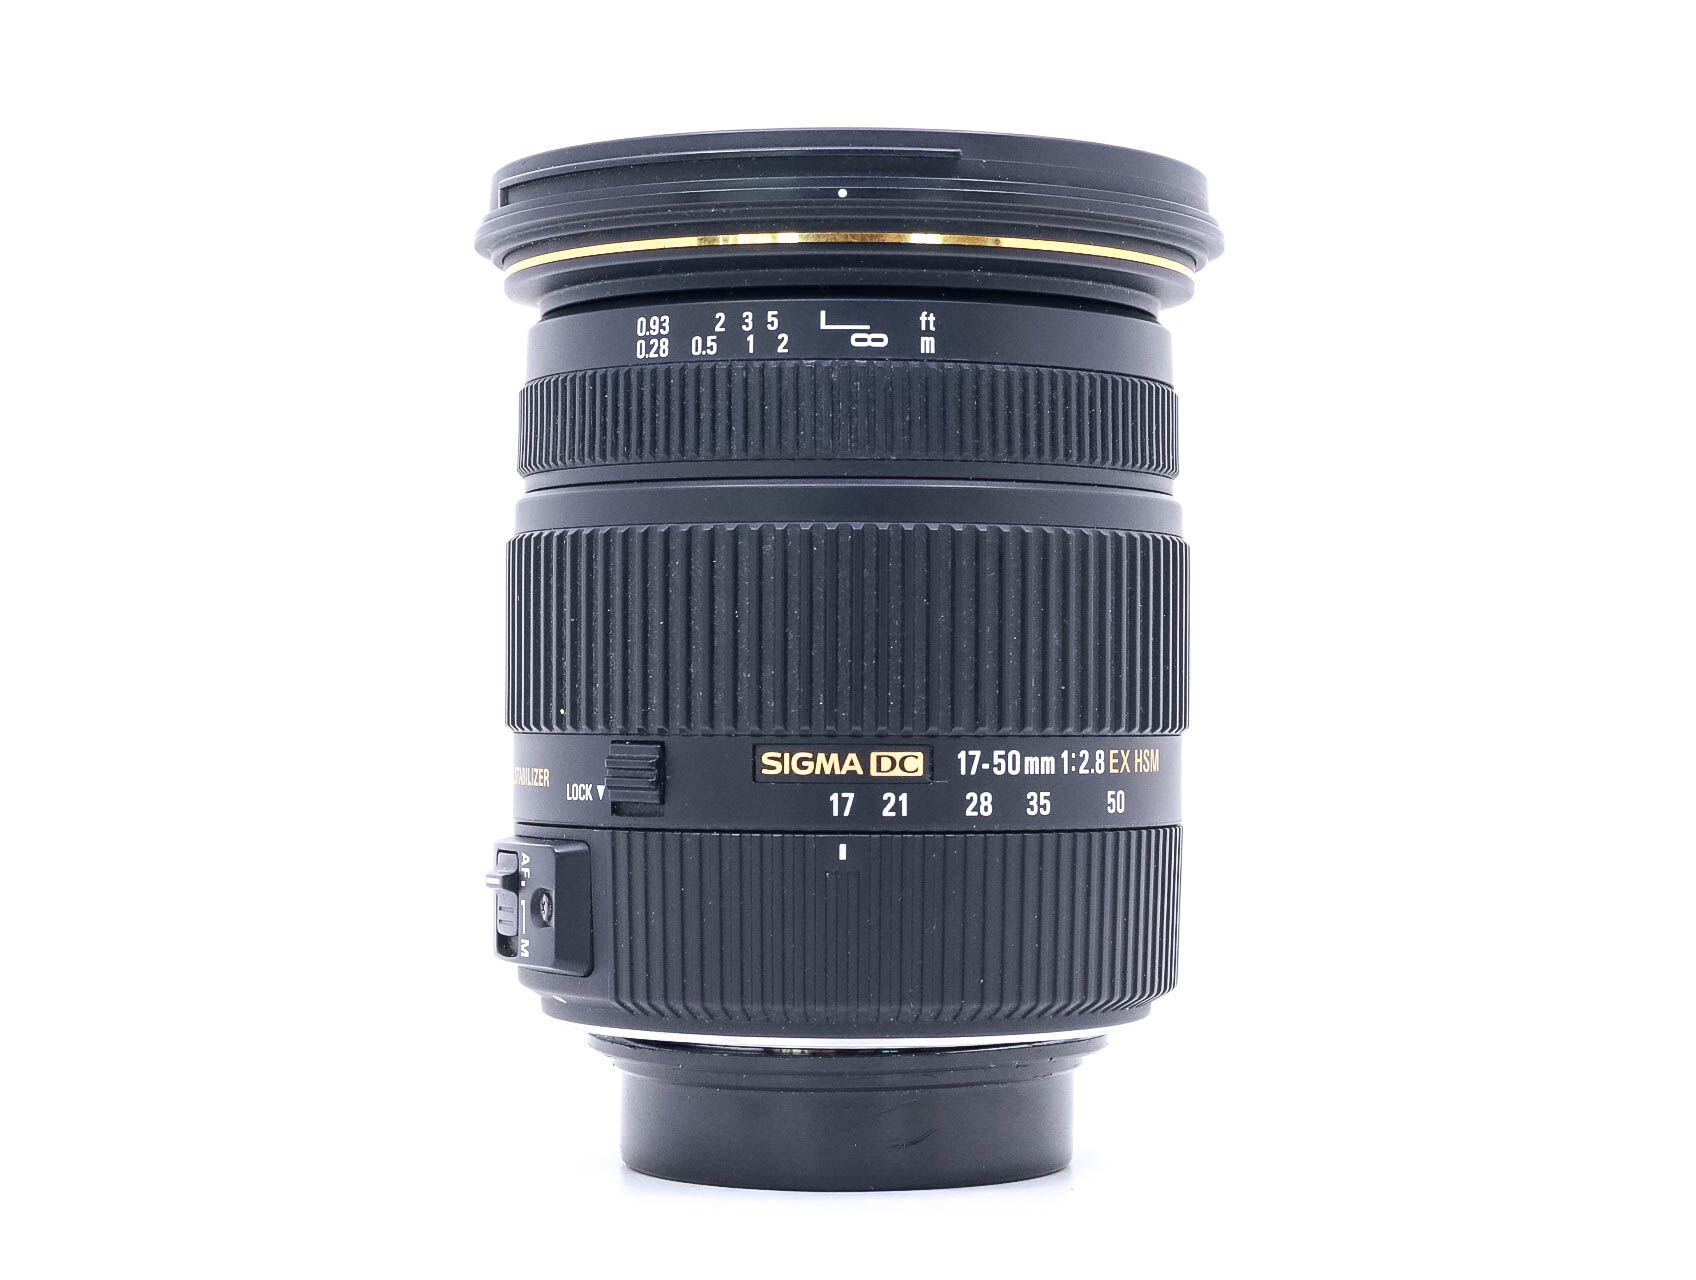 Sigma 17-50mm f/2.8 EX DC OS HSM SA fit (Condition: Good)